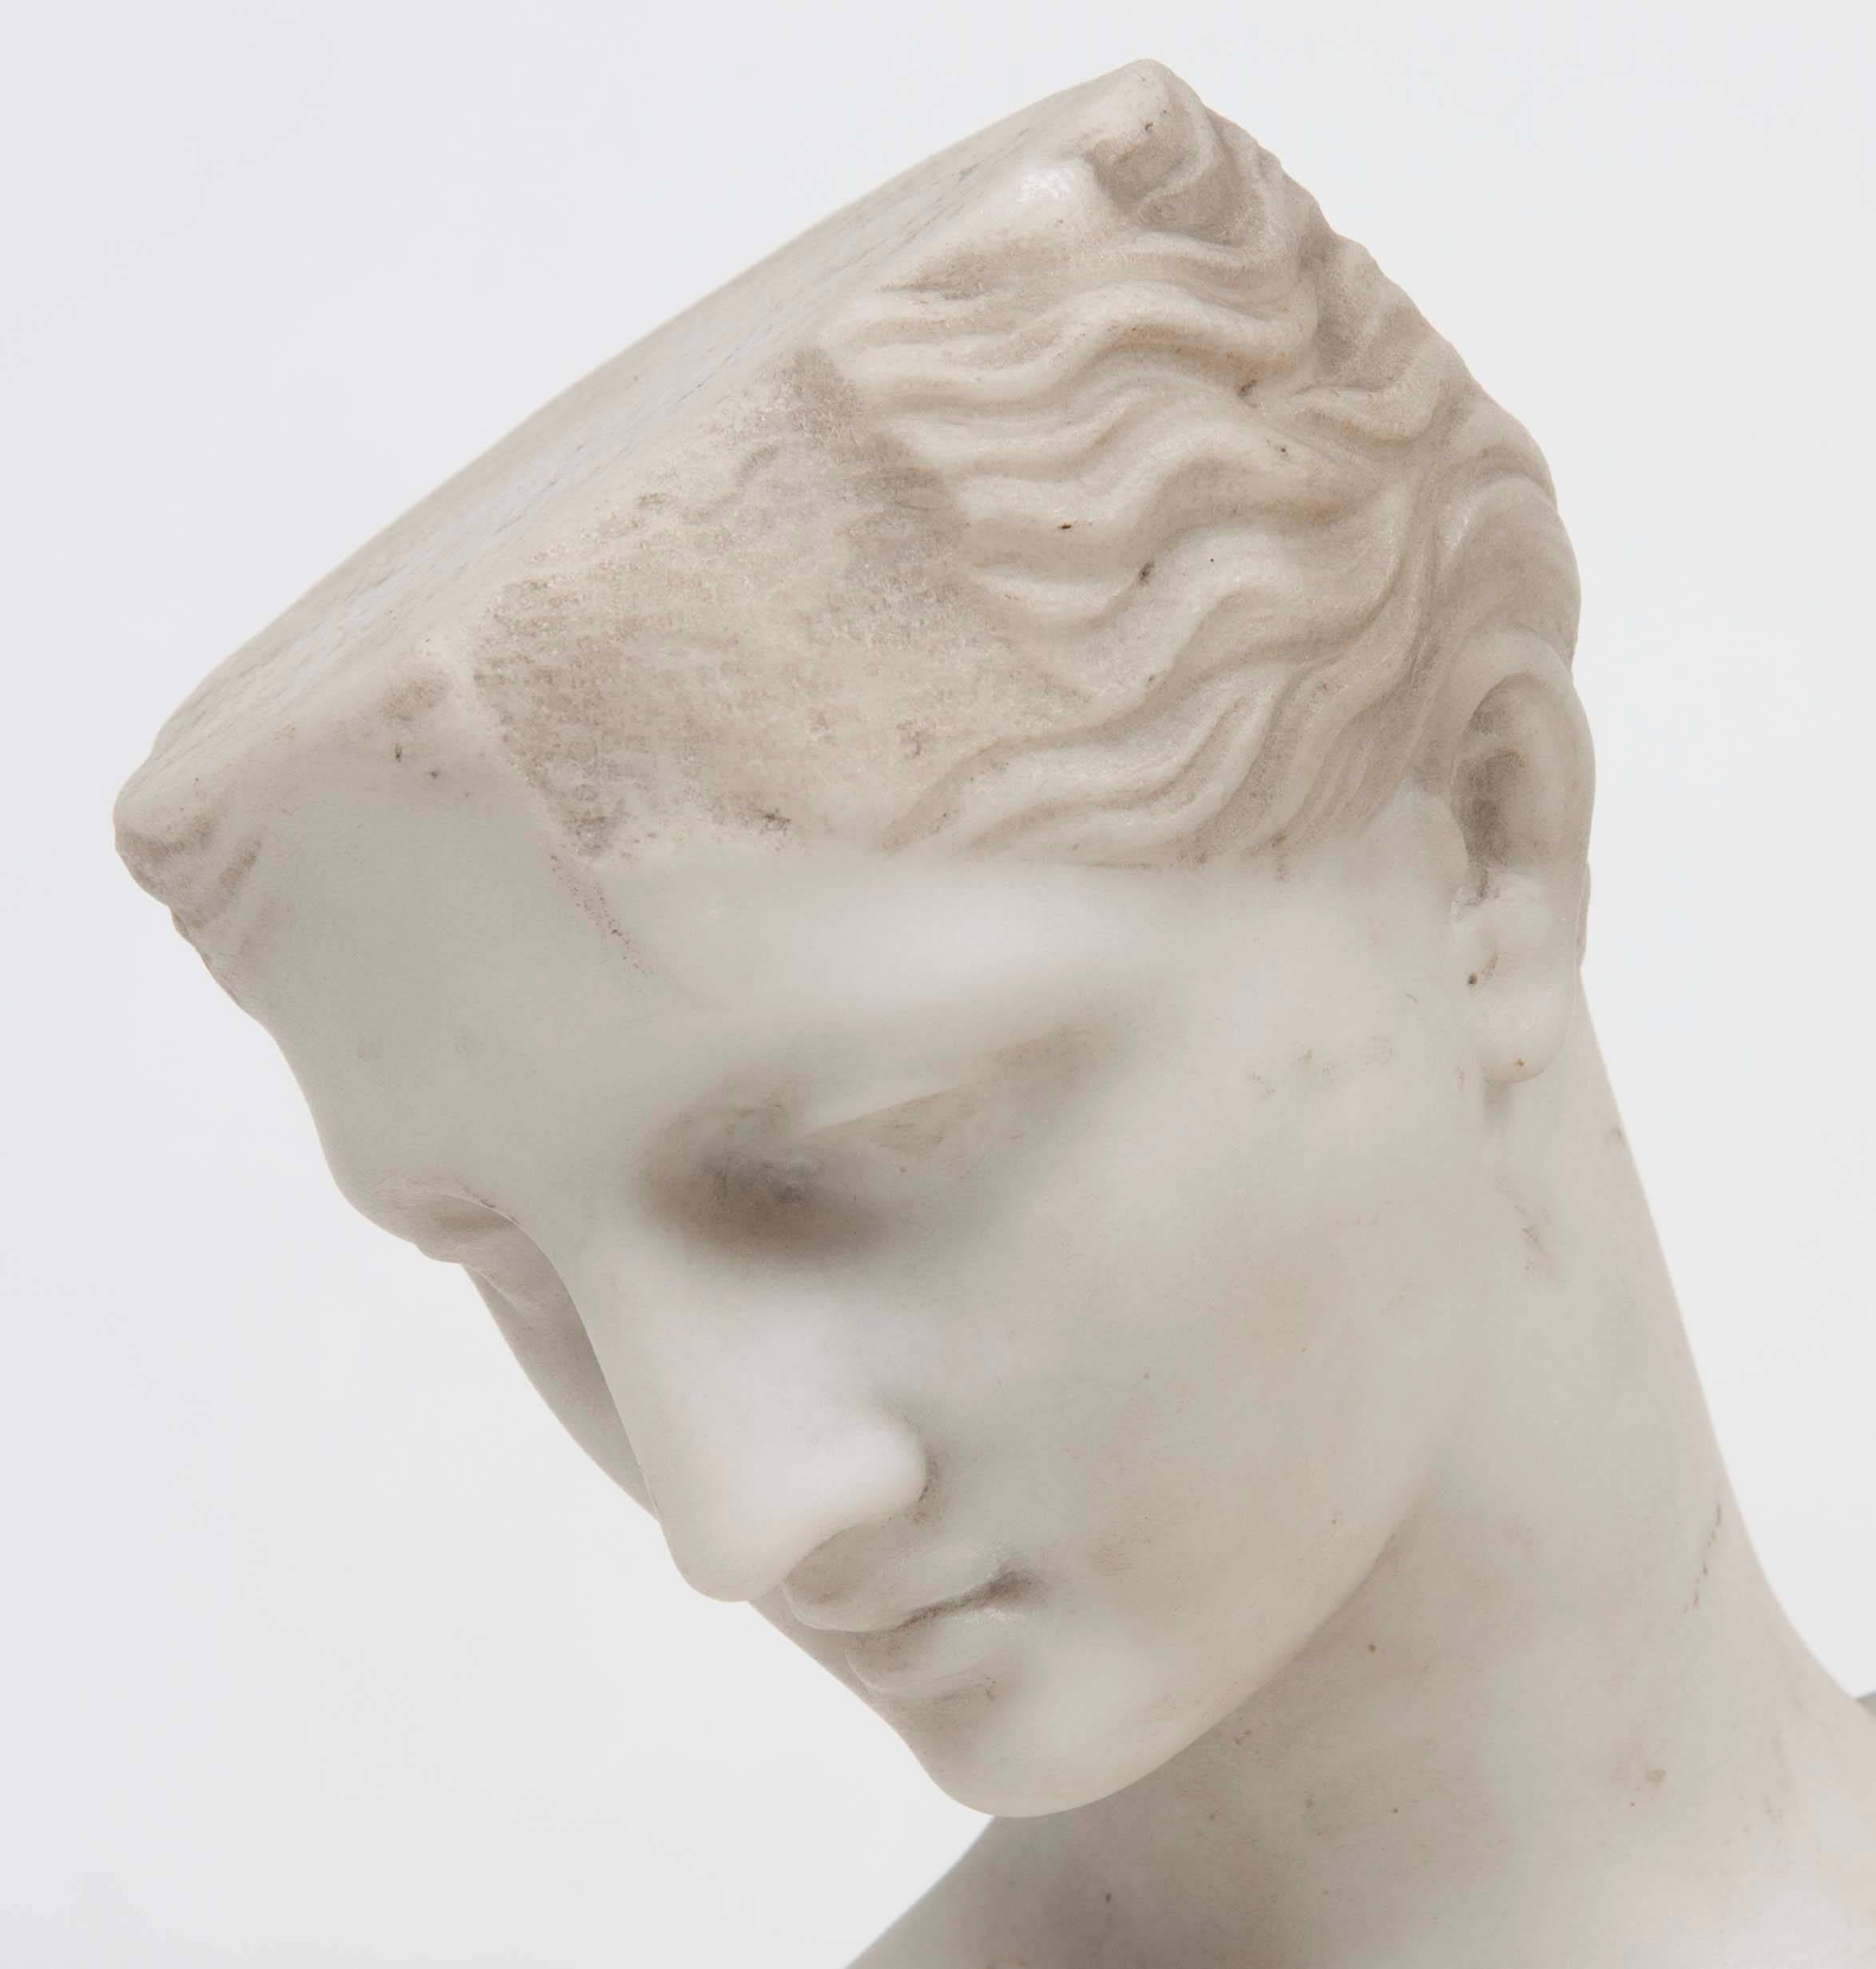 Psyche of Capua. White marble bust of Venus, after antique.
Italy, late 19th century.
Inscribed, 'Chiurazzi.'
Measures: 21 in. (53.3 cm) height.